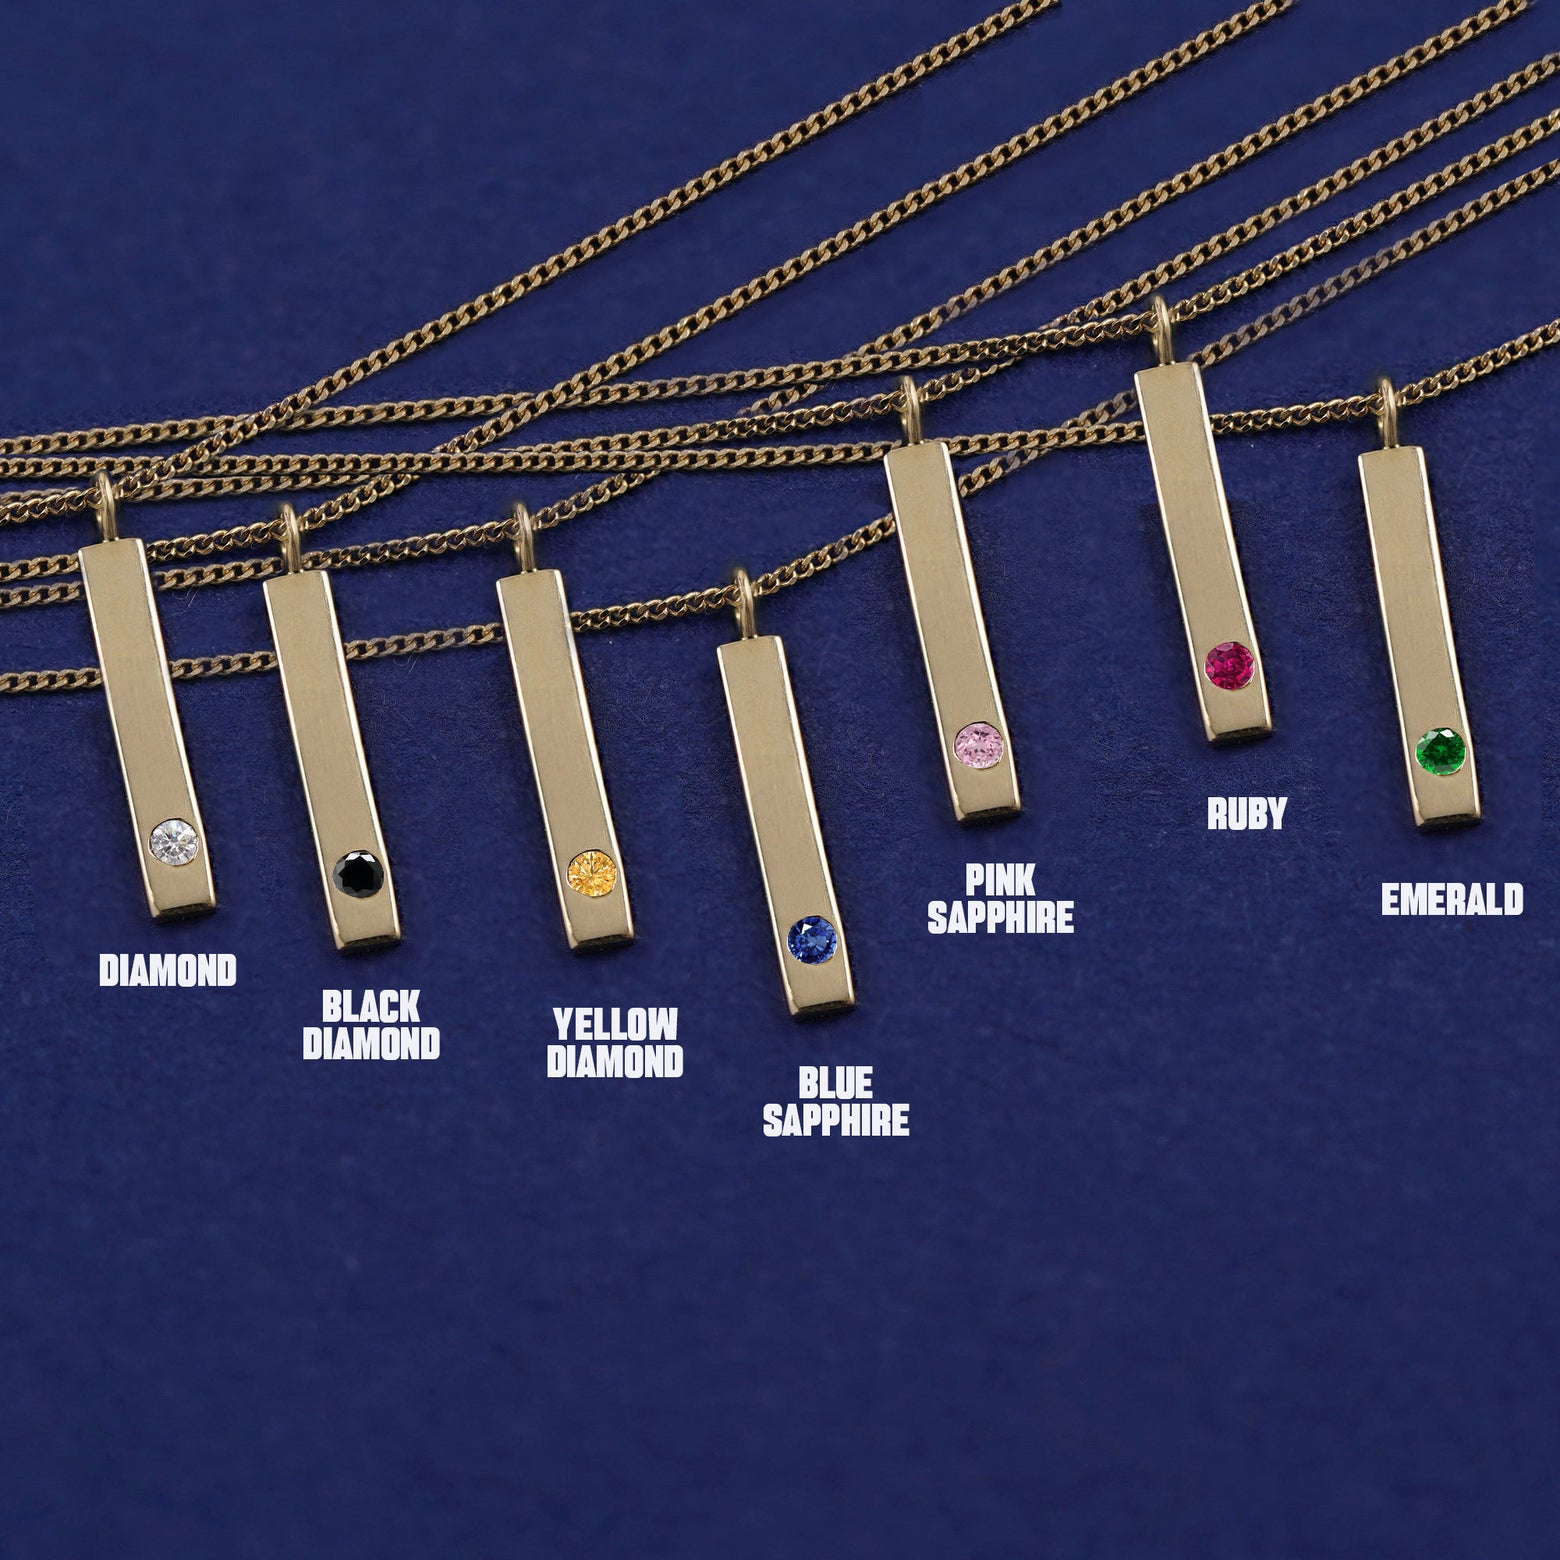 Seven versions of the Gemstone Bar Necklace showing all the gemstone options laid out on a dark blue background